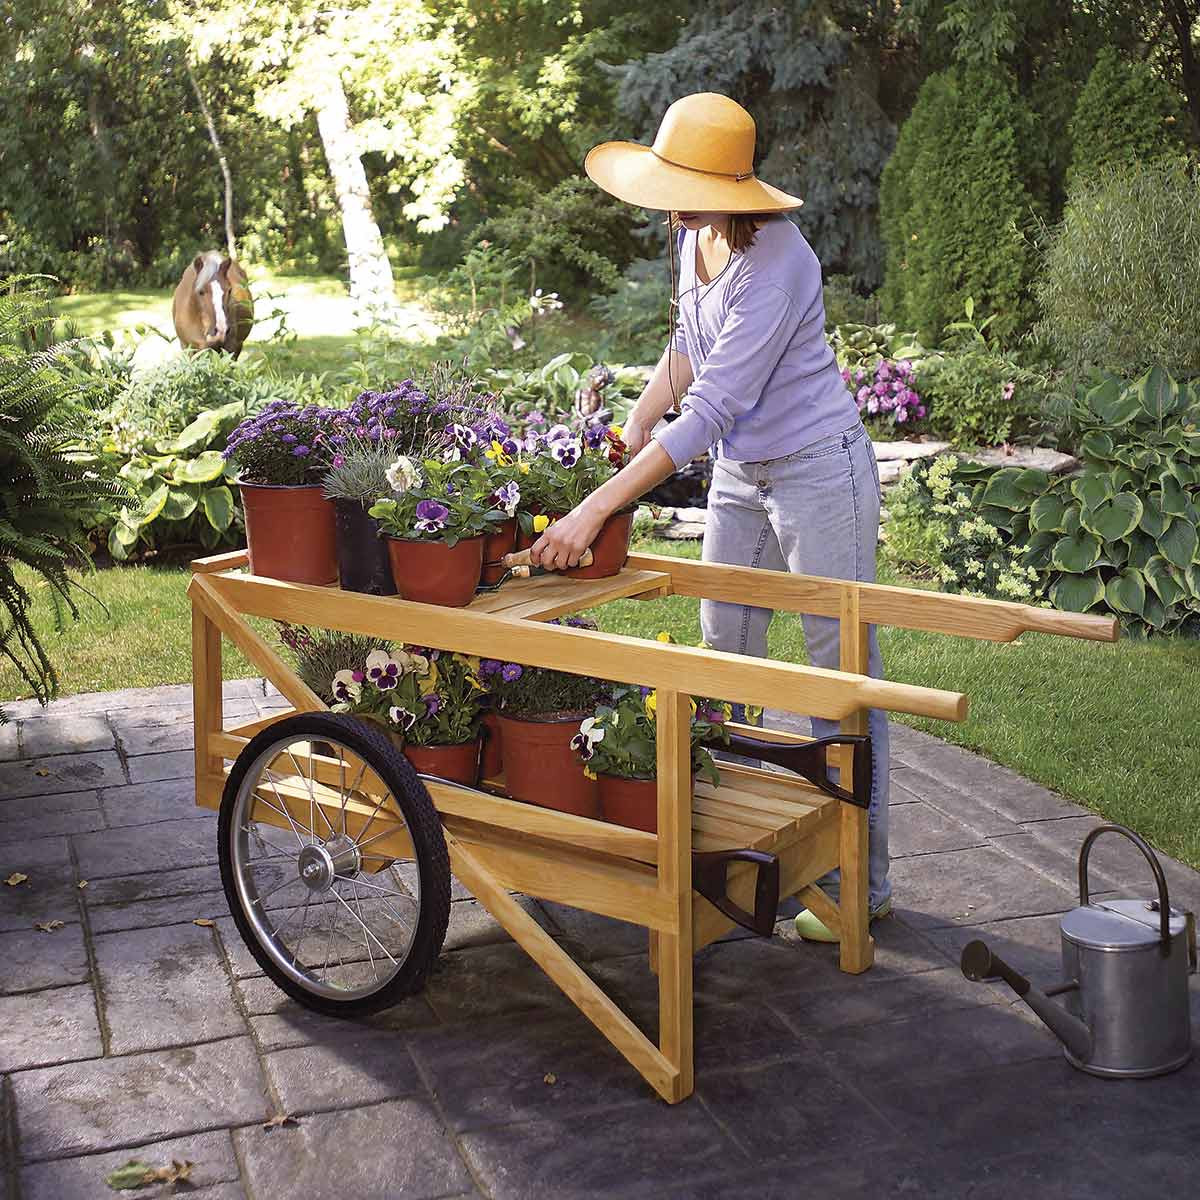 Backyard Wood Projects
 40 Outdoor Woodworking Projects for Beginners — The Family